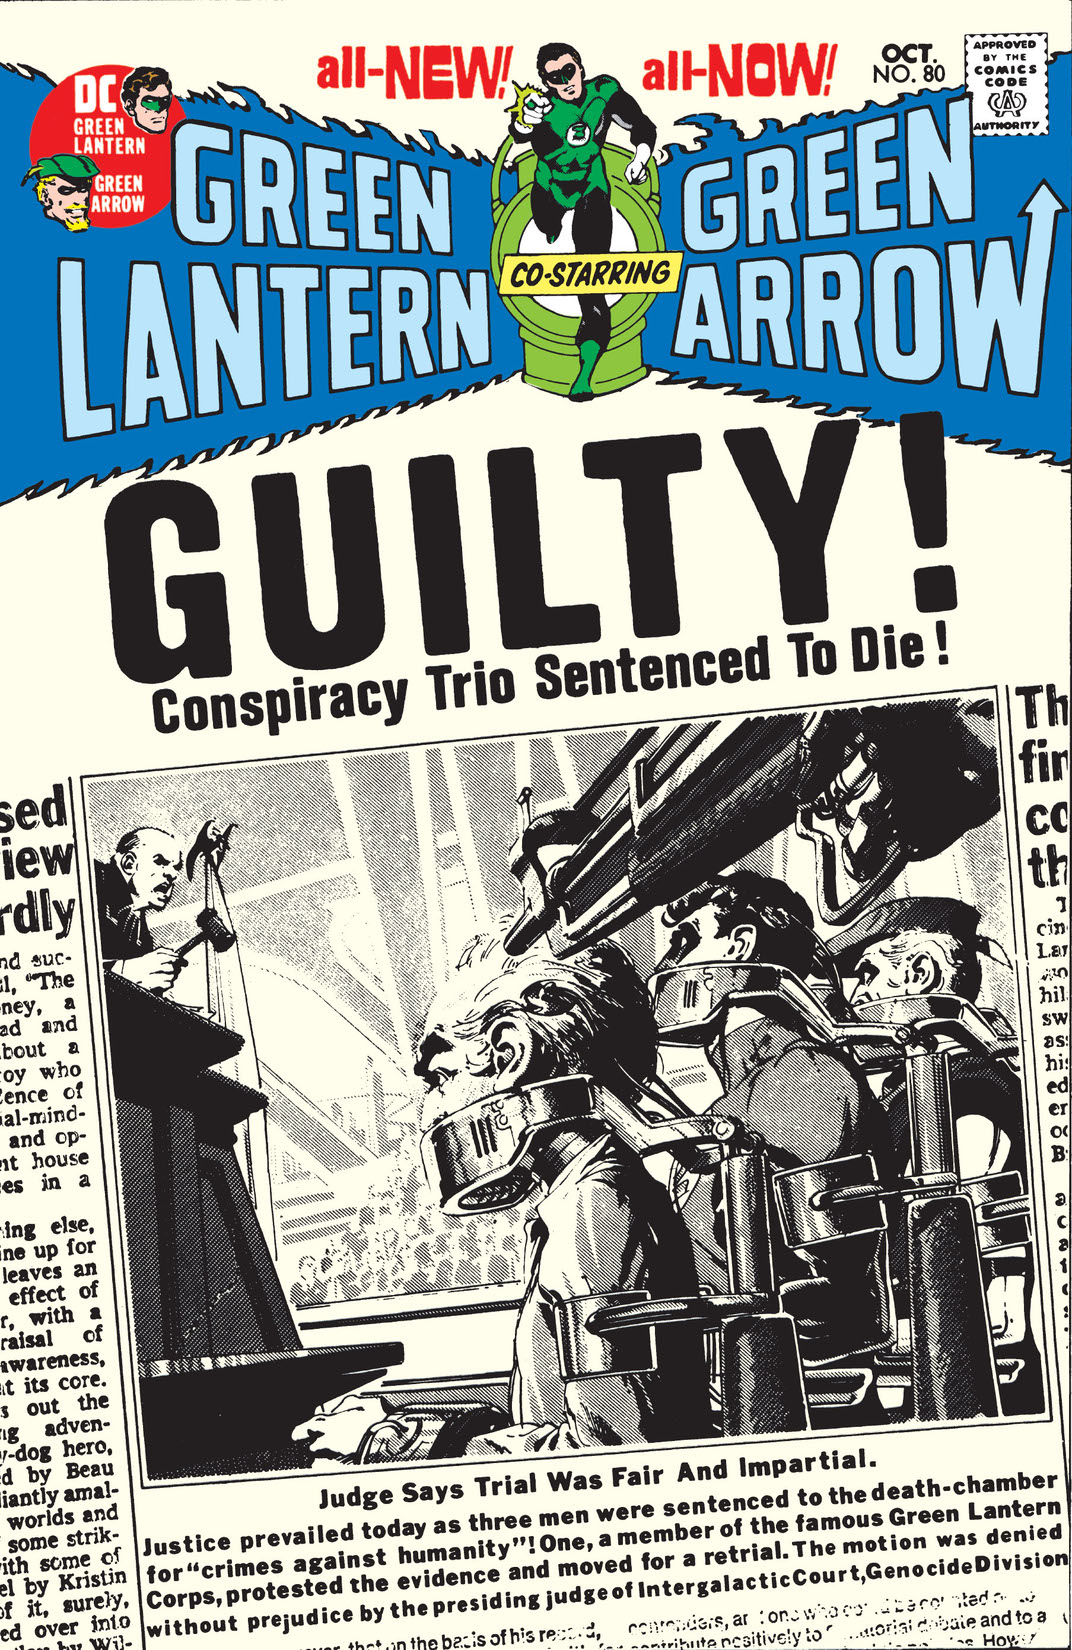 Green Lantern (1960-) #80 preview images